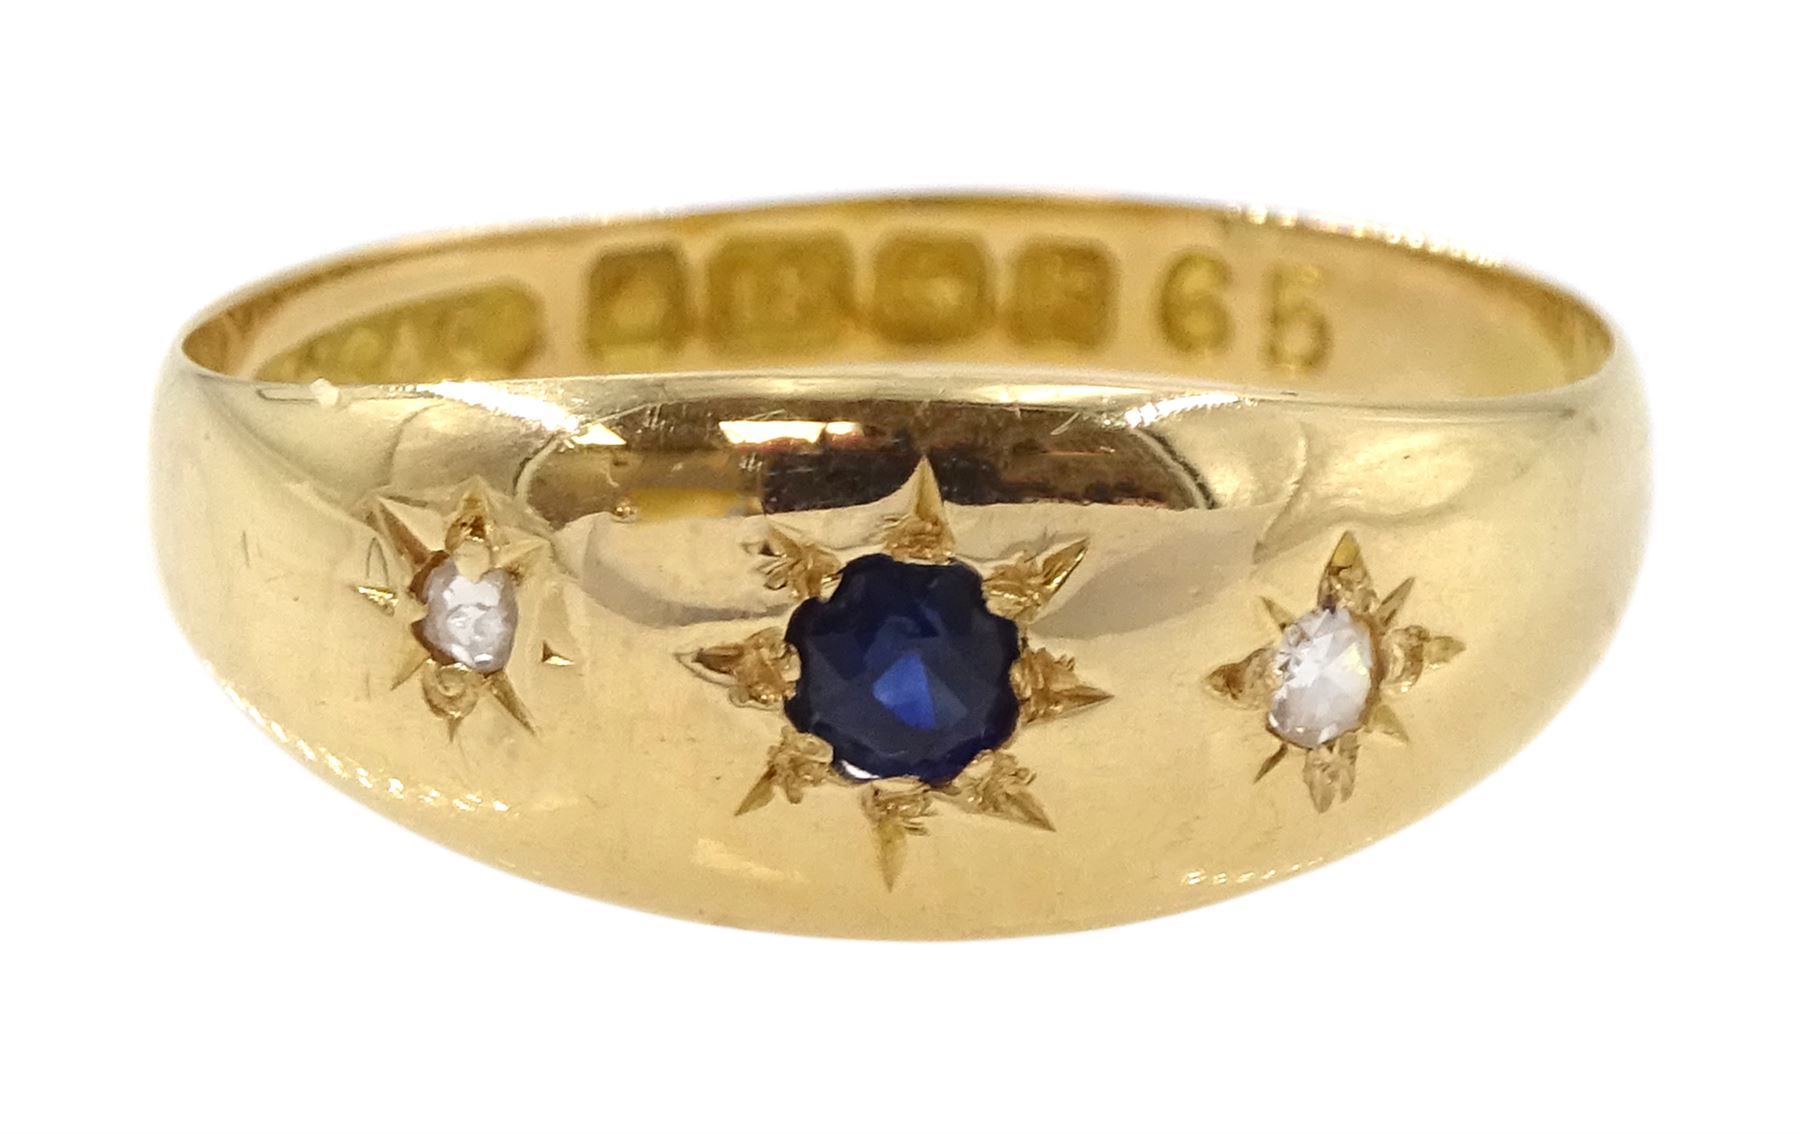 Edwardian 18ct gold gypsy set three stone sapphire and diamond ring by A W Crosbee & Co